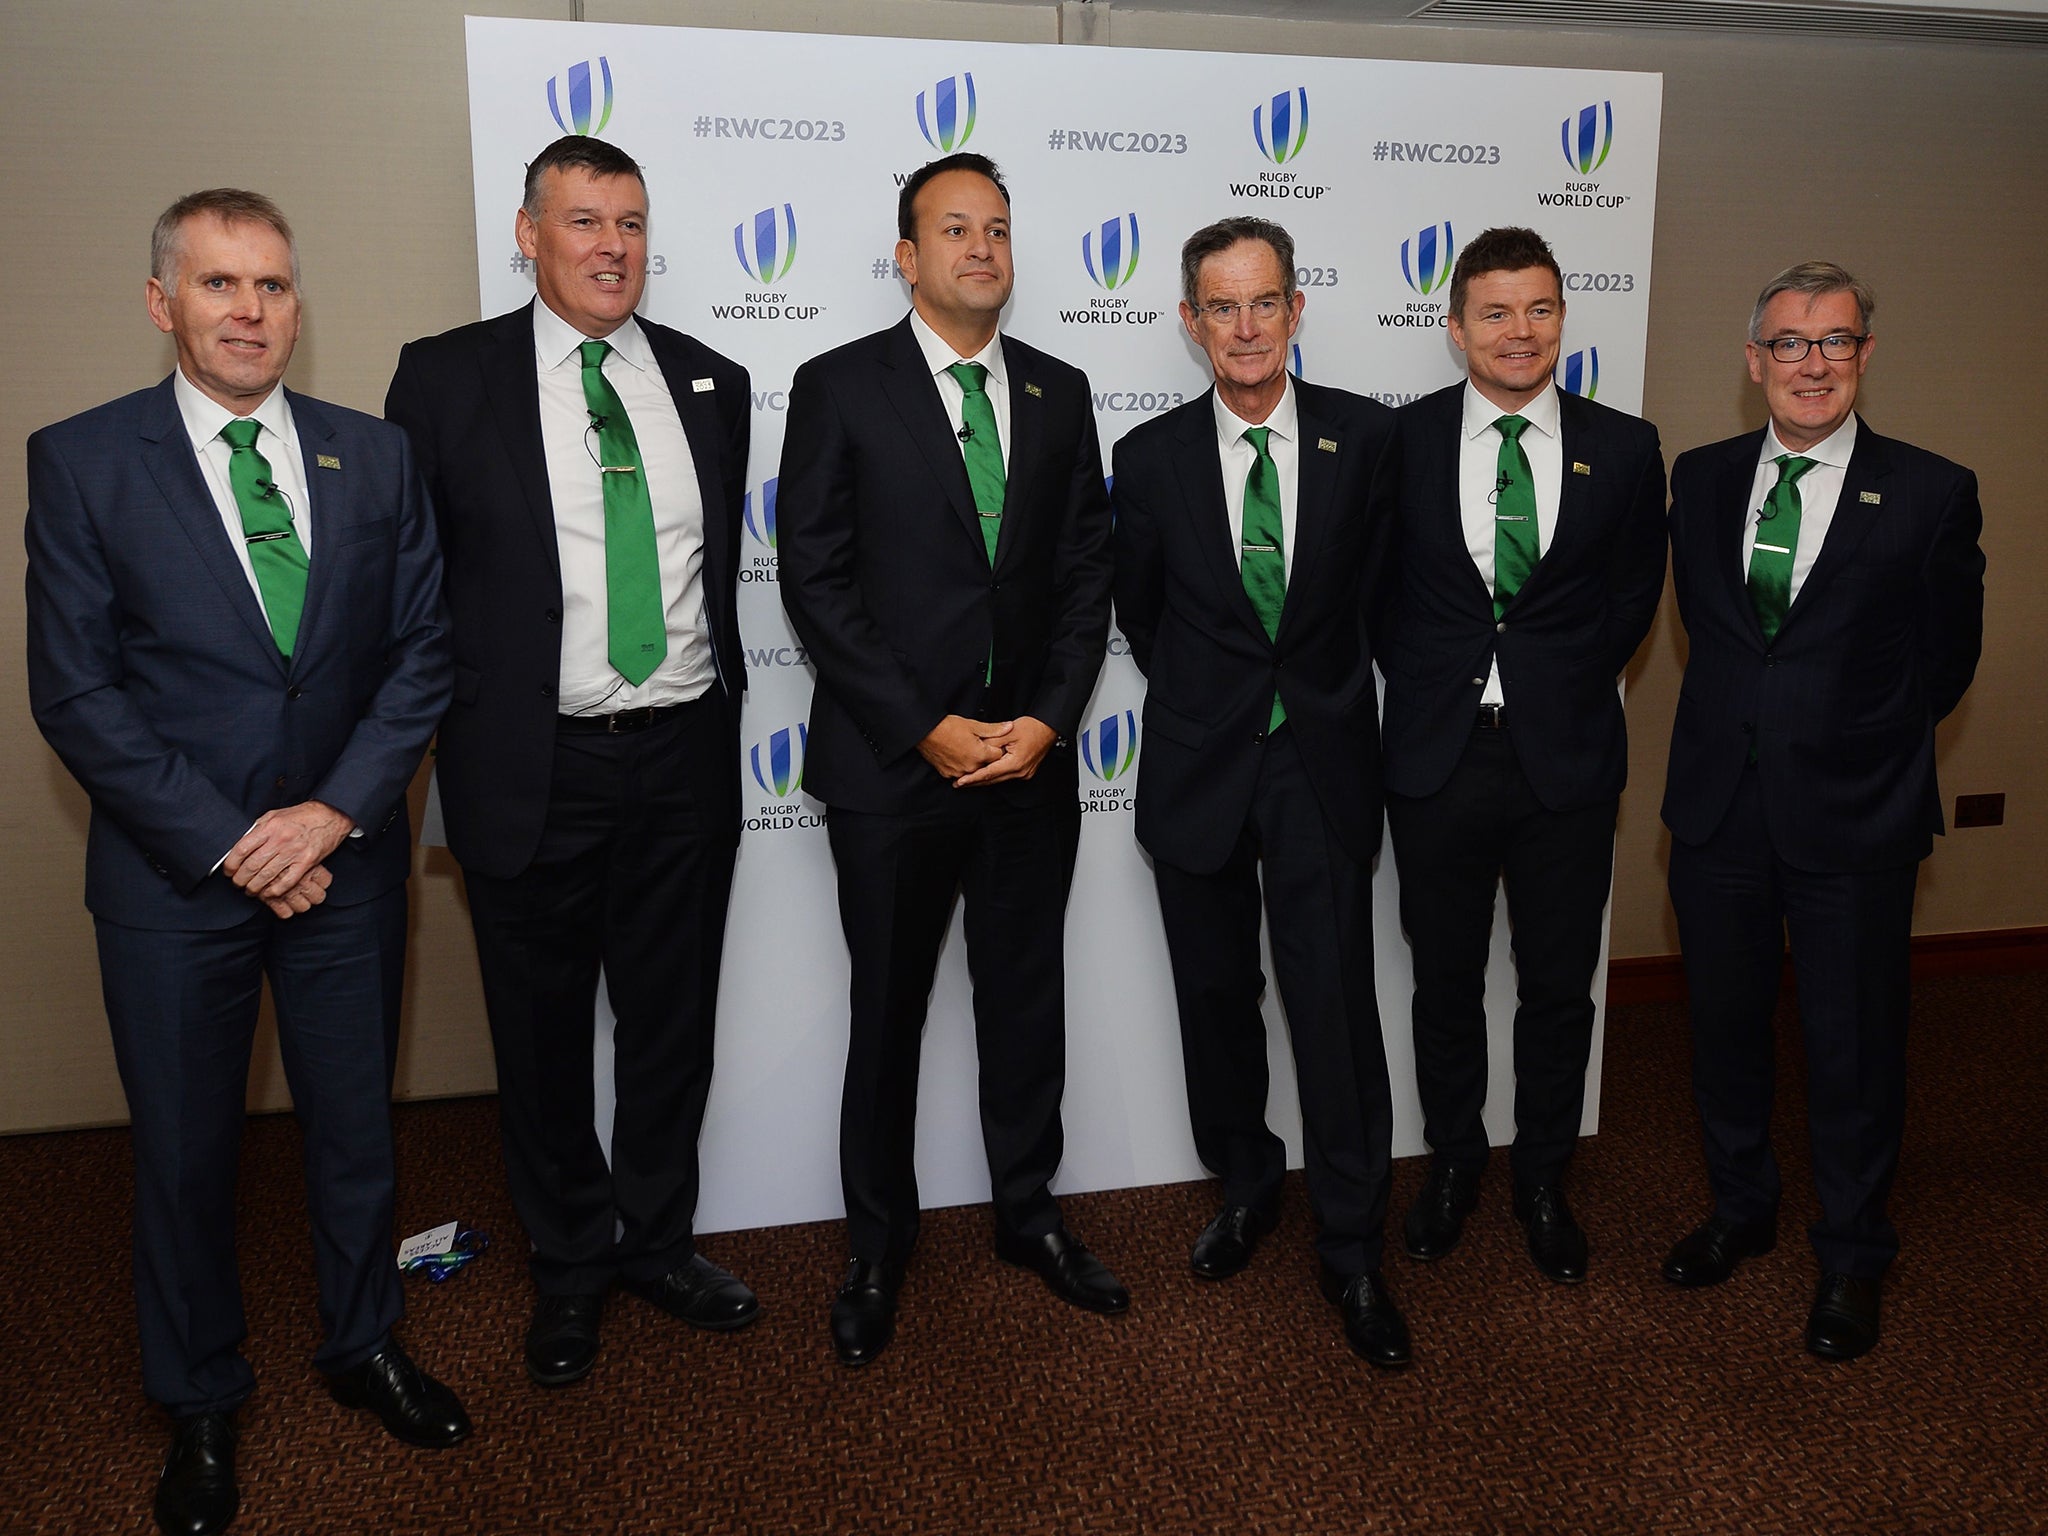 Ireland's 2023 Rugby World Cup bid team present their case in London on Monday